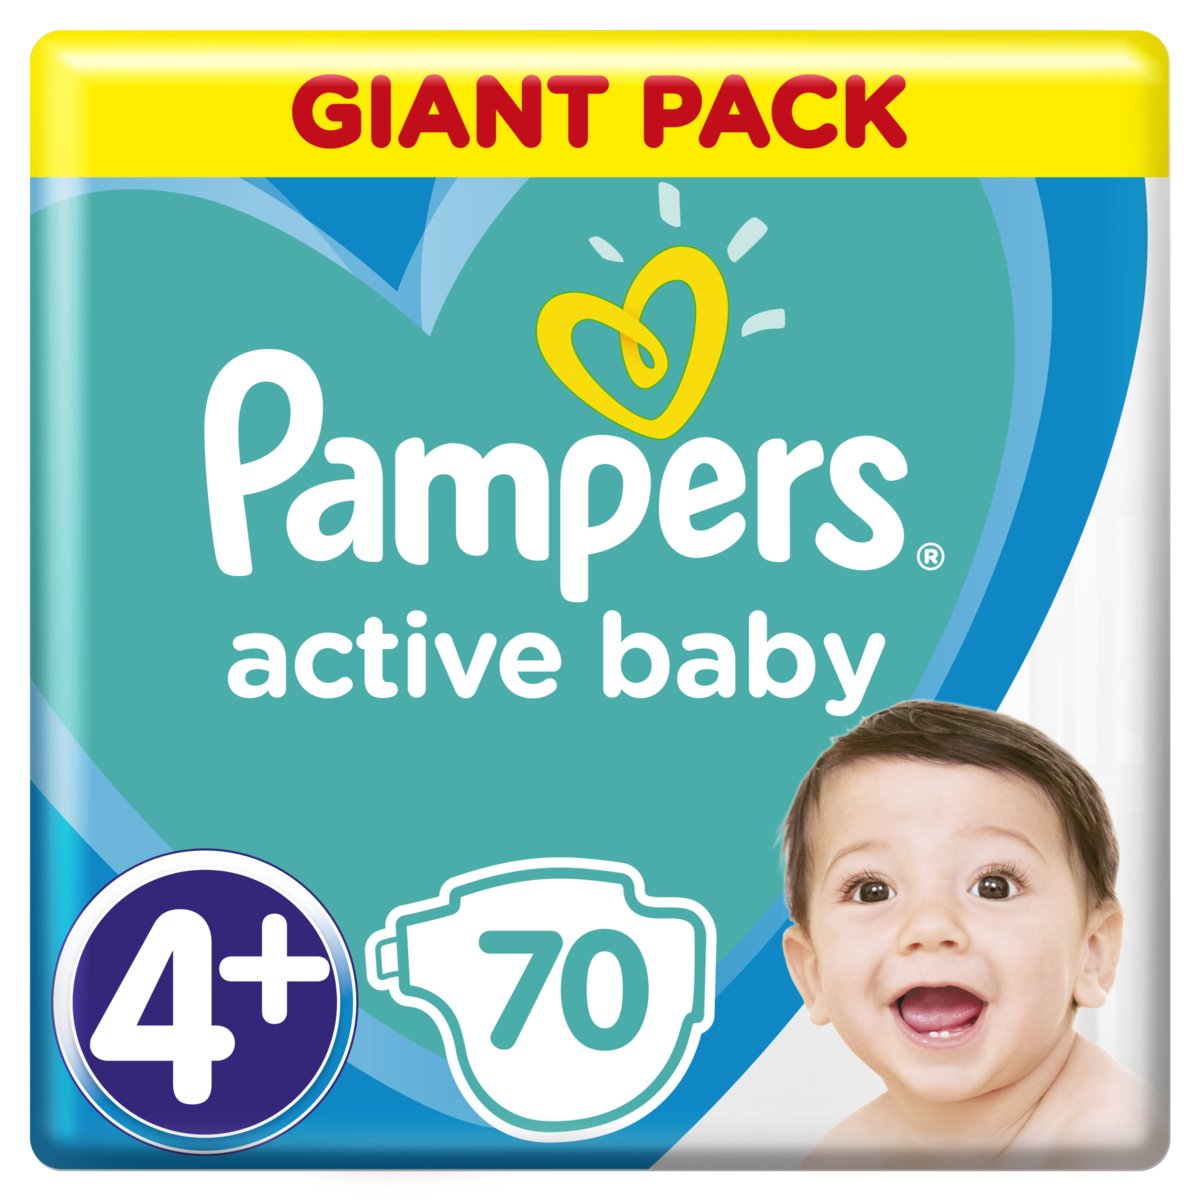 pampers 4 plus co to jest